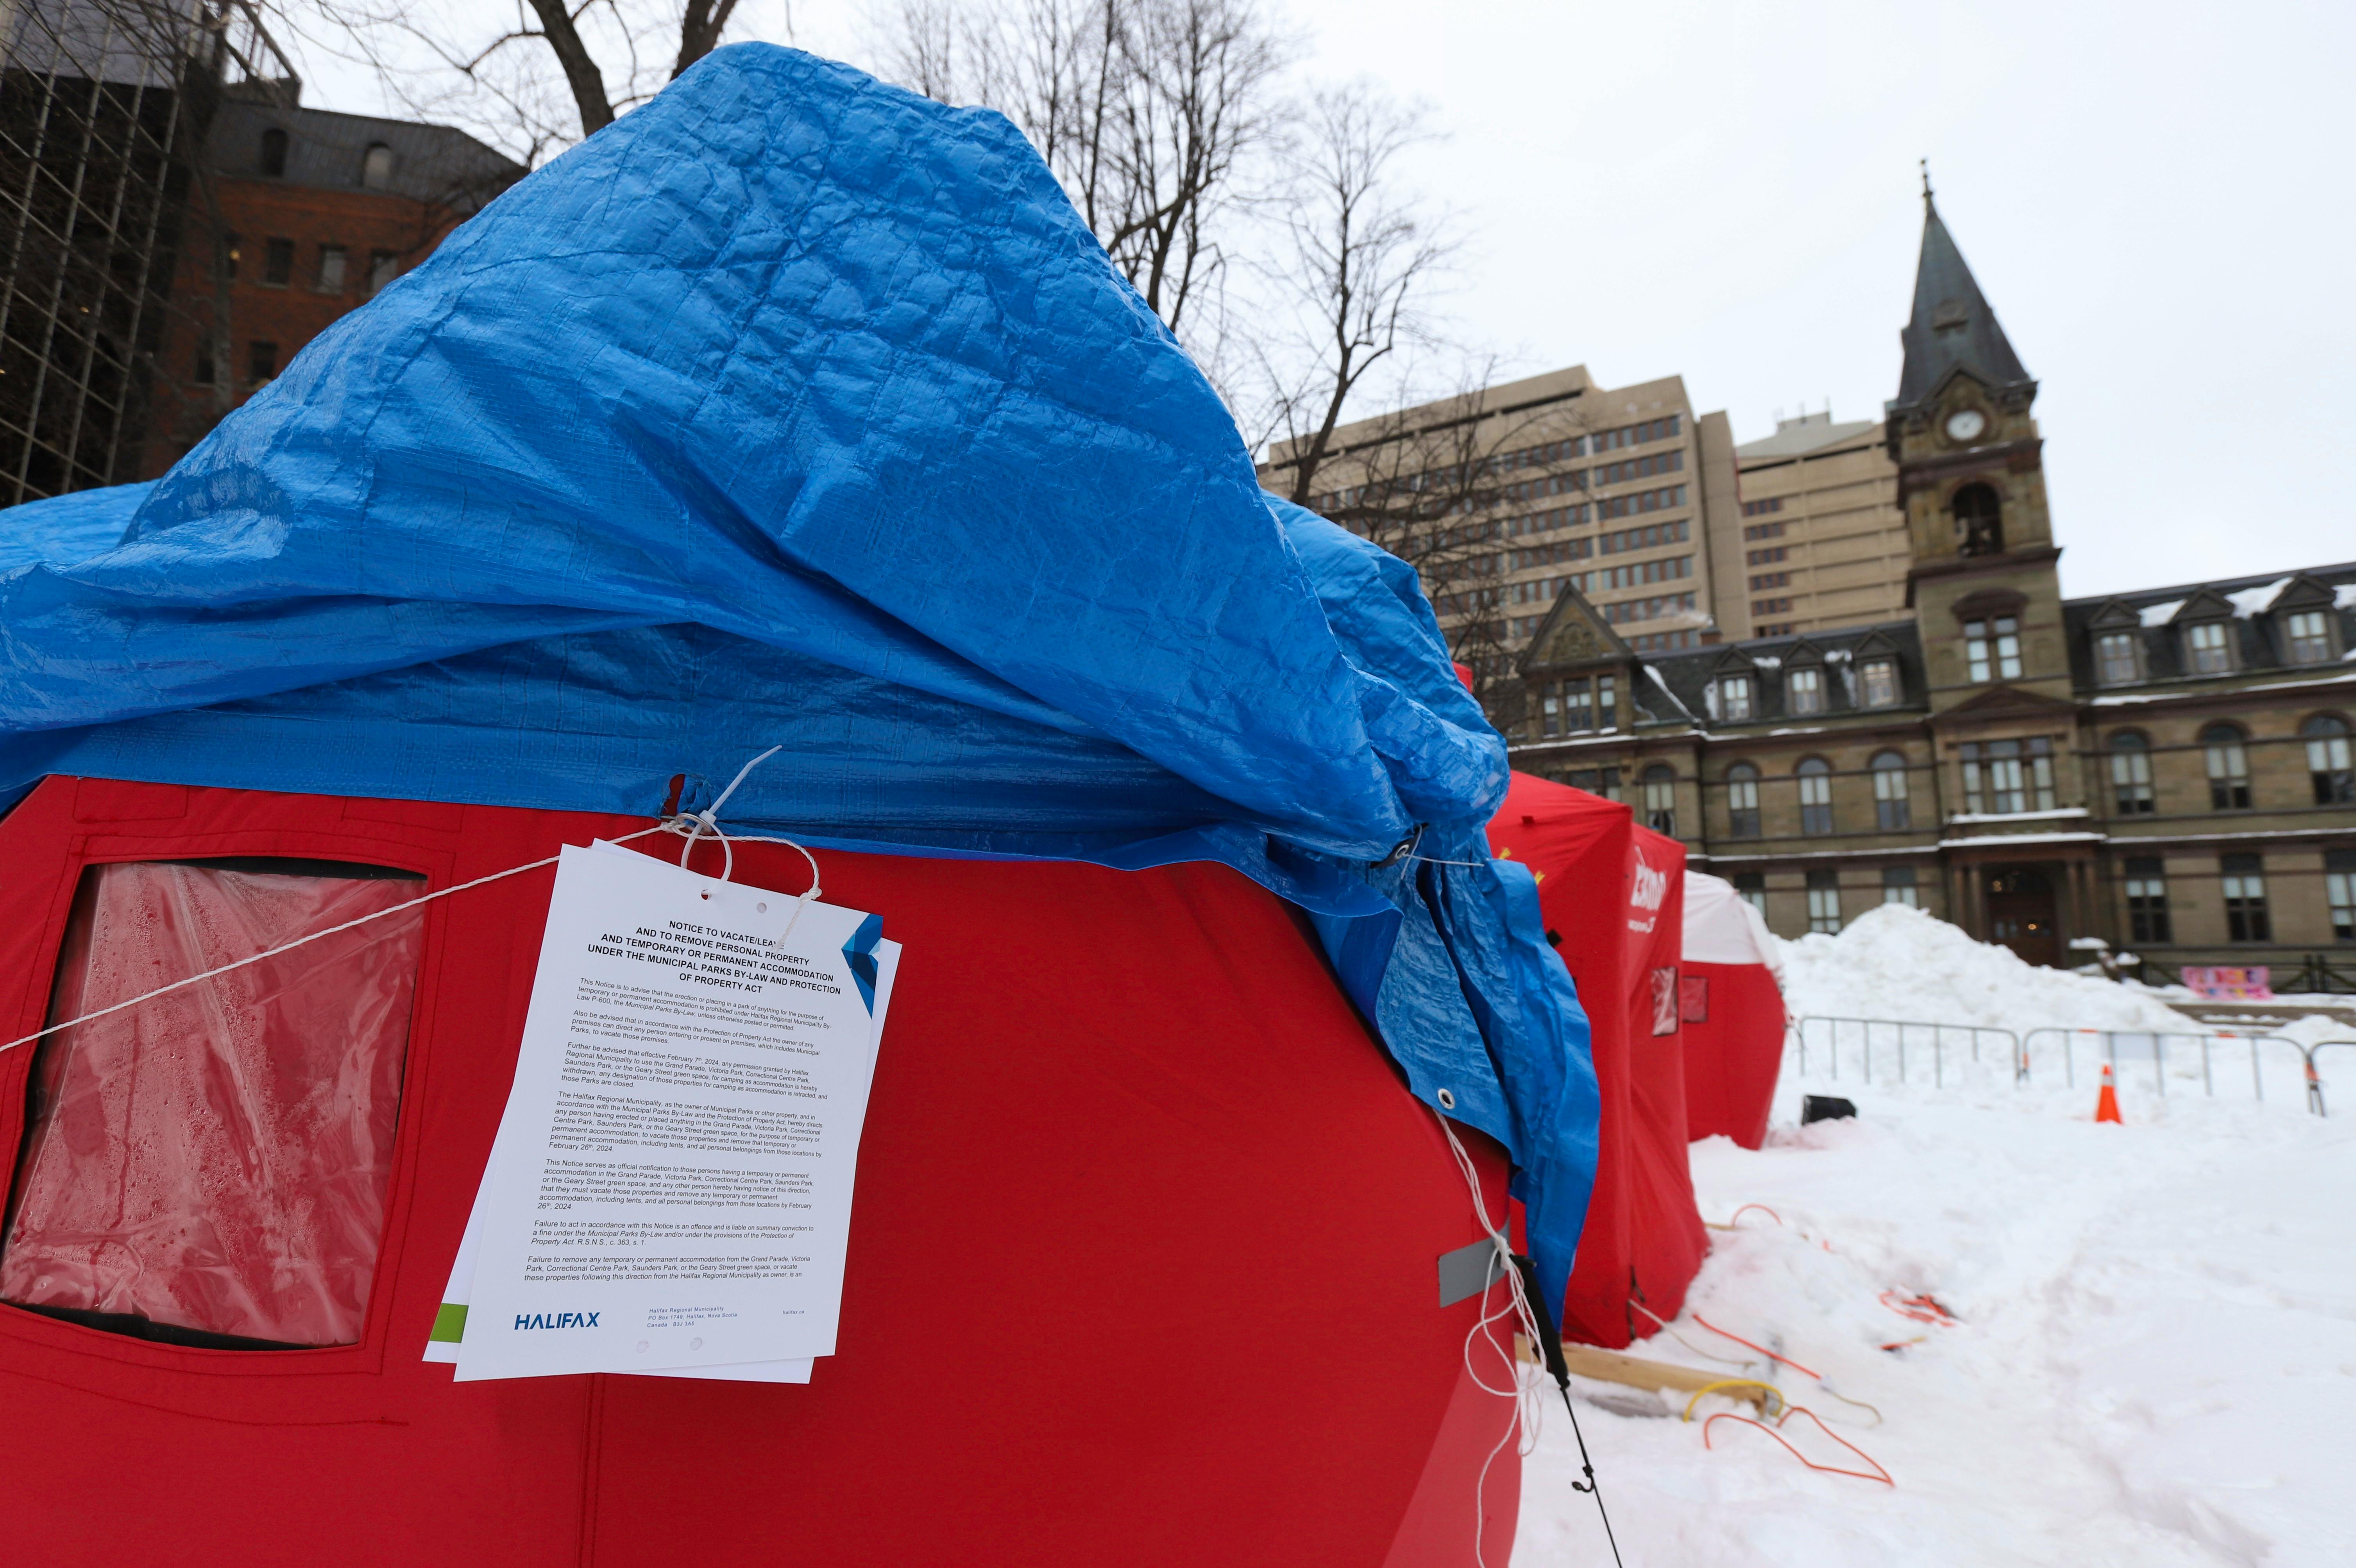 EDITORIAL: A shelter is not a home for people who prefer tent